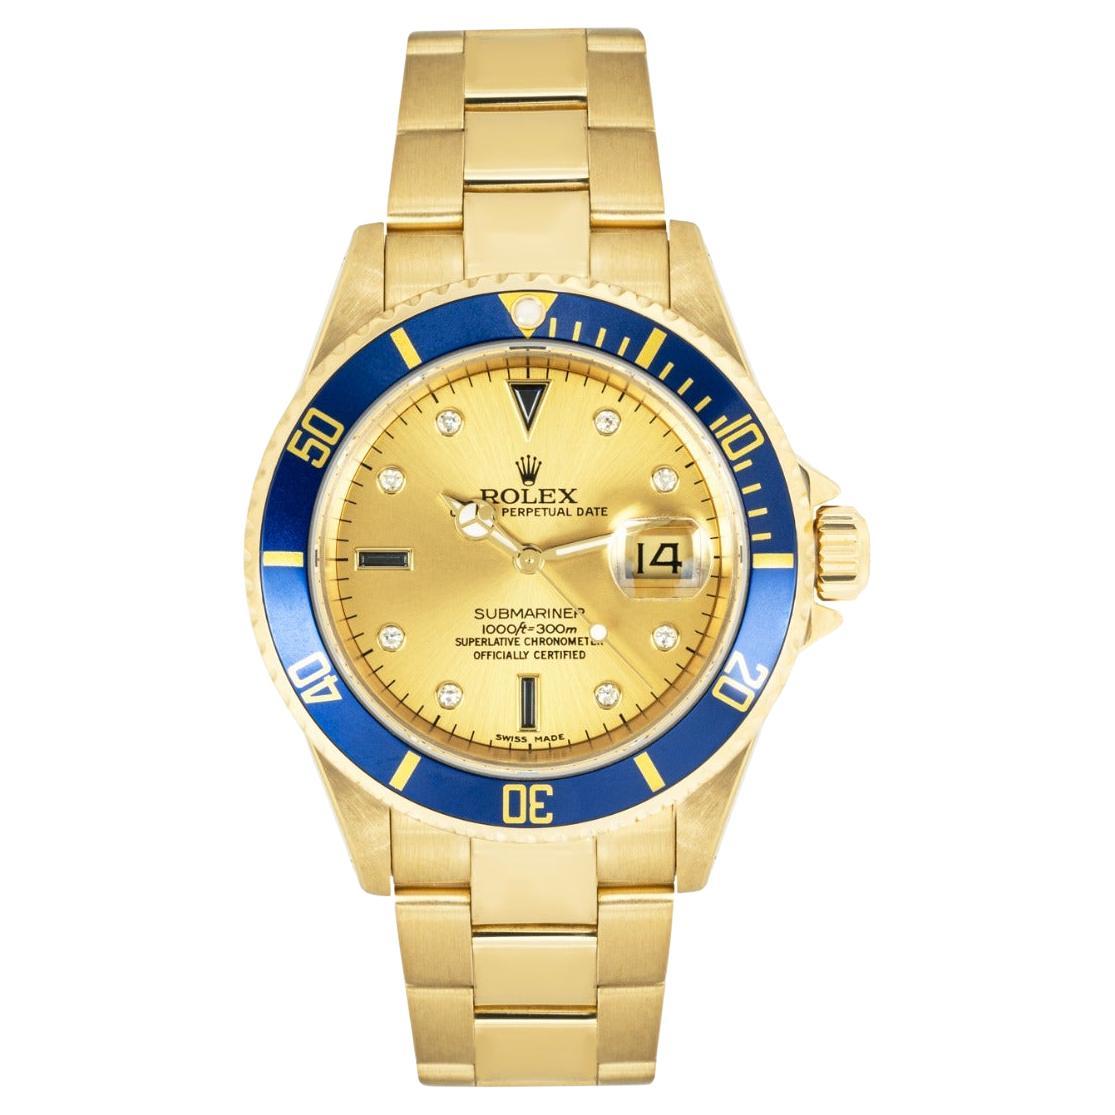 How much gold is in a gold Submariner?